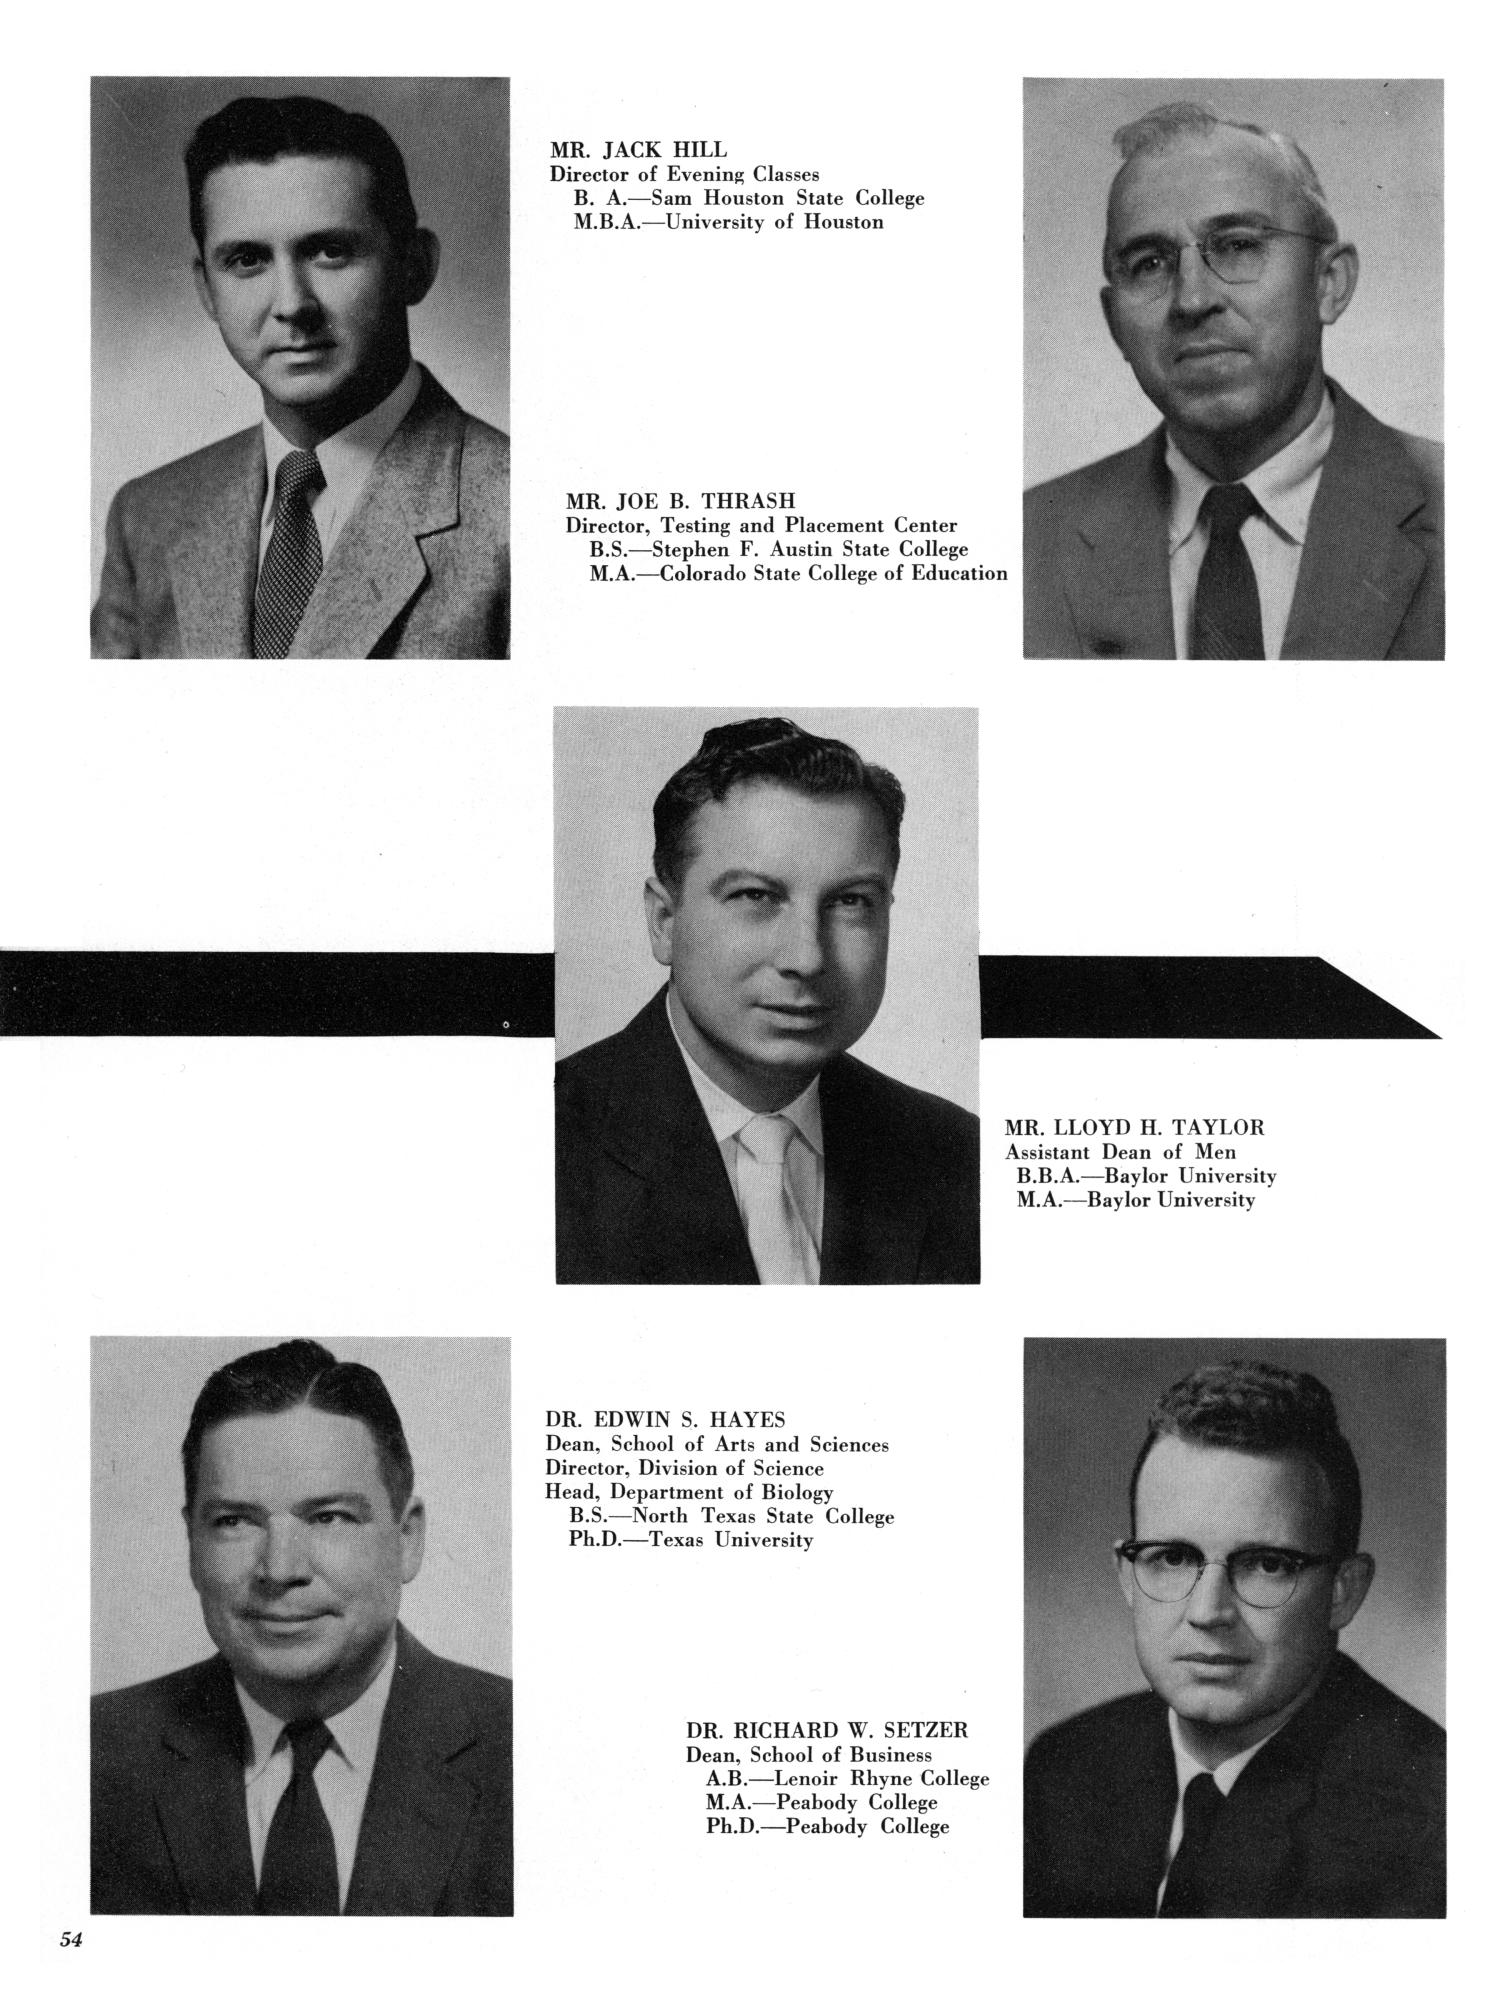 The Cardinal, Yearbook of Lamar State College of Technology, 1957
                                                
                                                    54
                                                